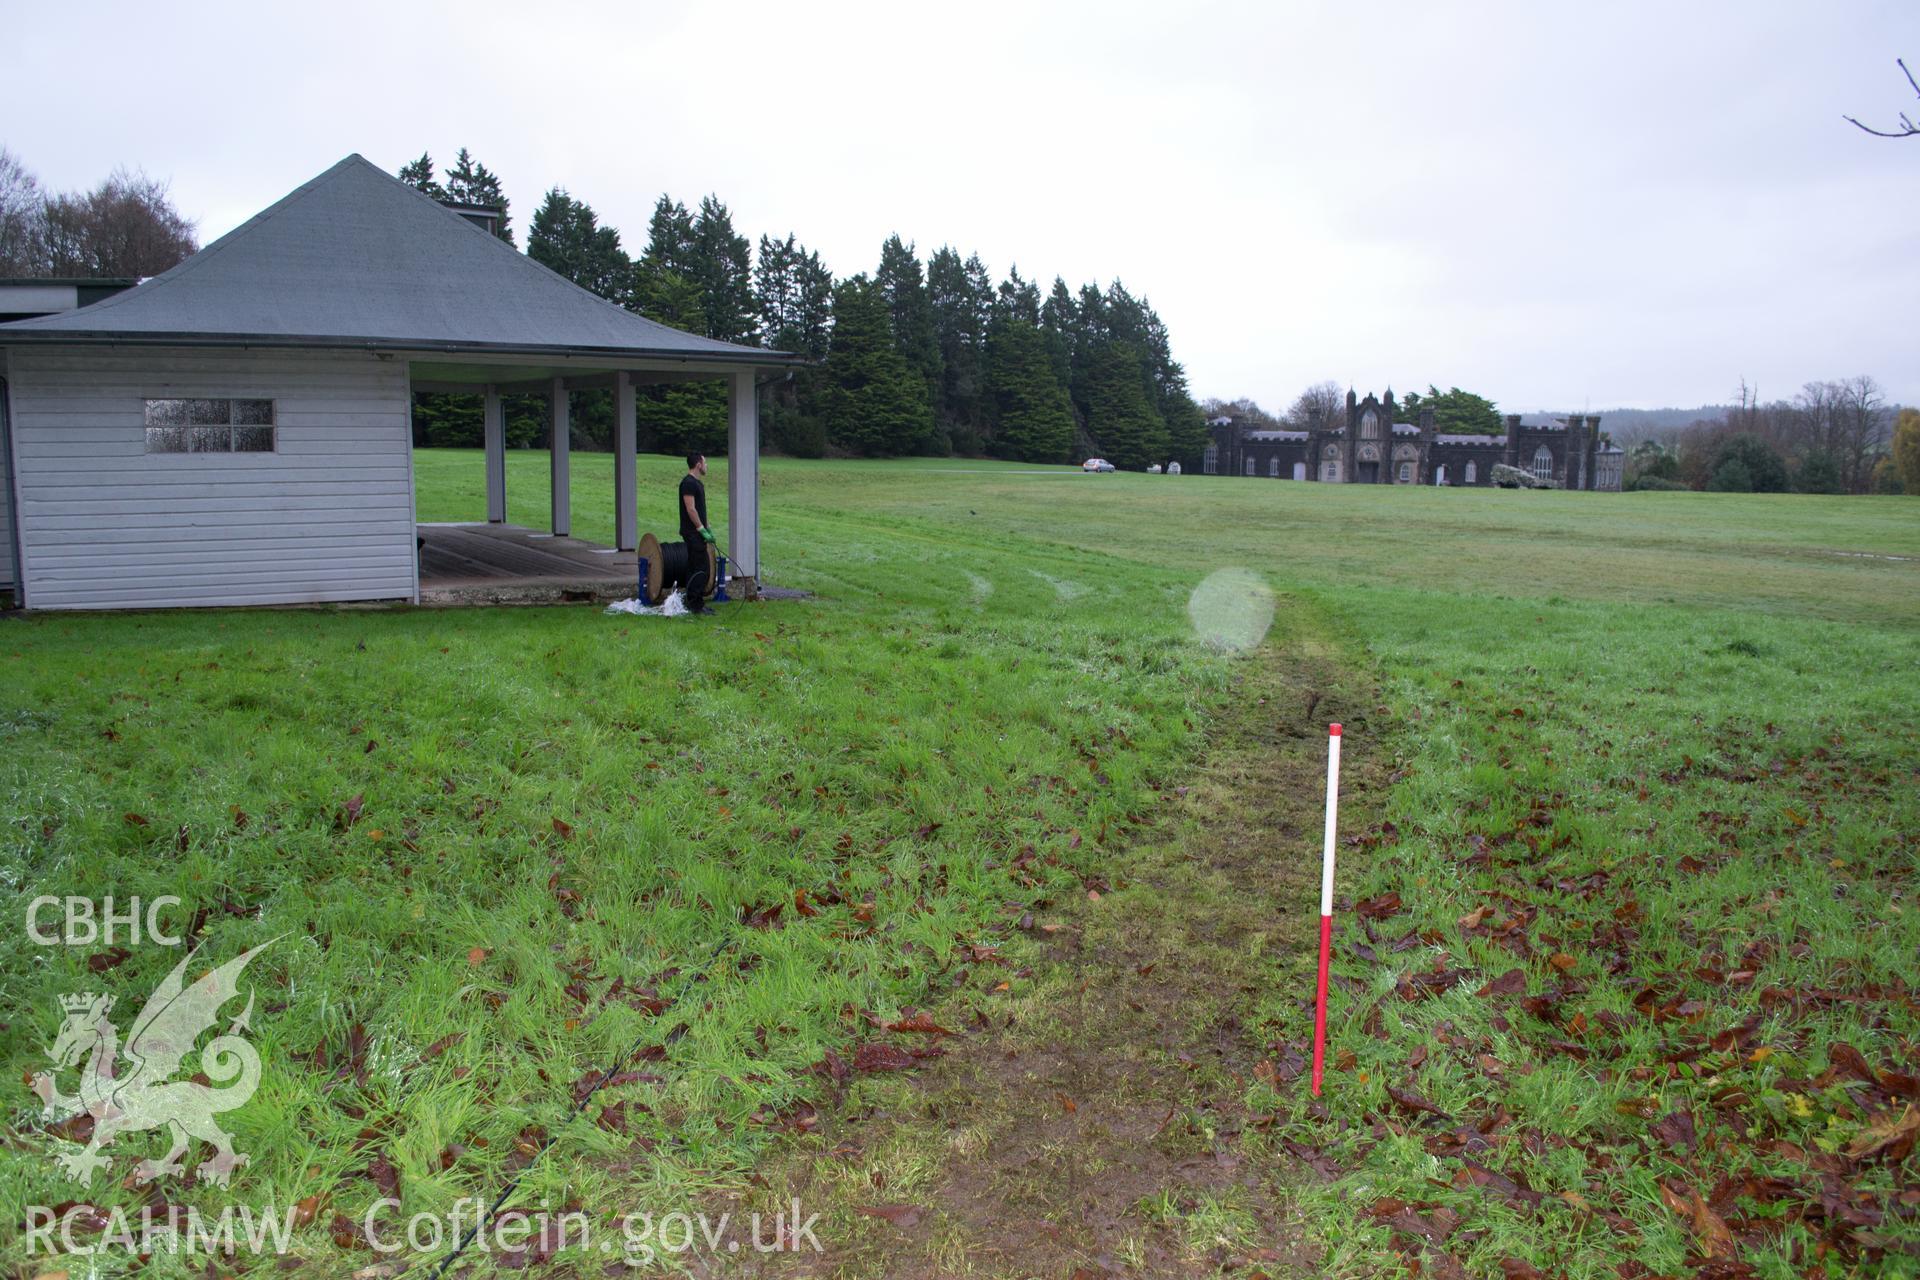 General view from south west along cable route, pre-excavation, showing pavilion & stable block in background. Photographed during watching brief of Plas Newydd, Ynys Mon, conducted by Gwynedd Archaeological Trust, 14/11/2017. Project no. 2542.